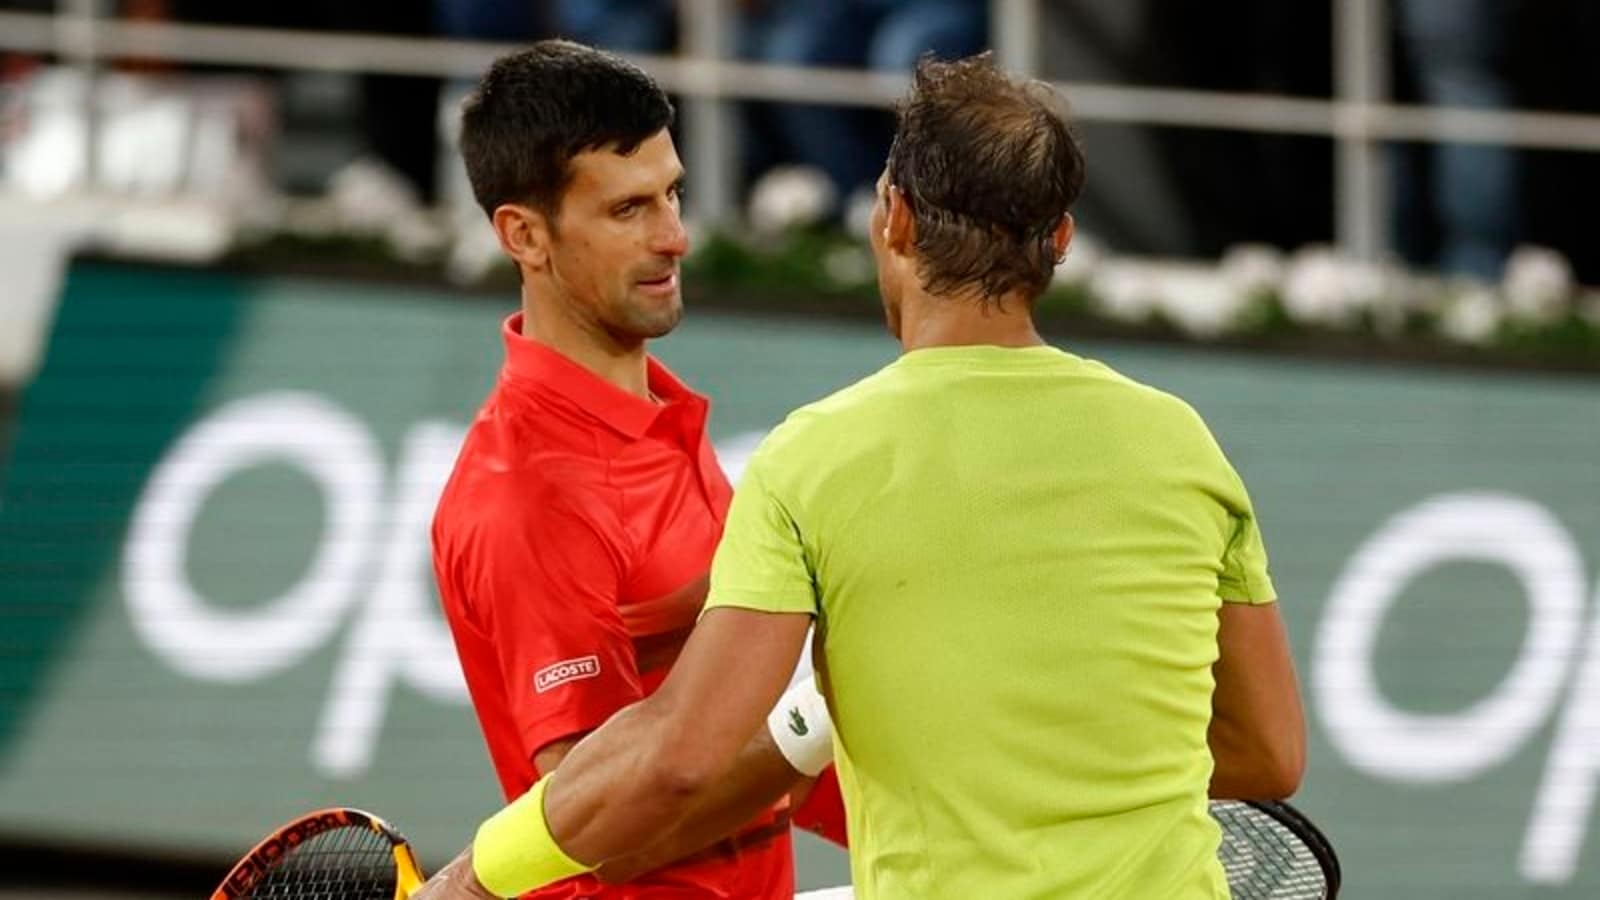 Lost to a better player': Djokovic after going down to Nadal in French Open  | Tennis News - Hindustan Times